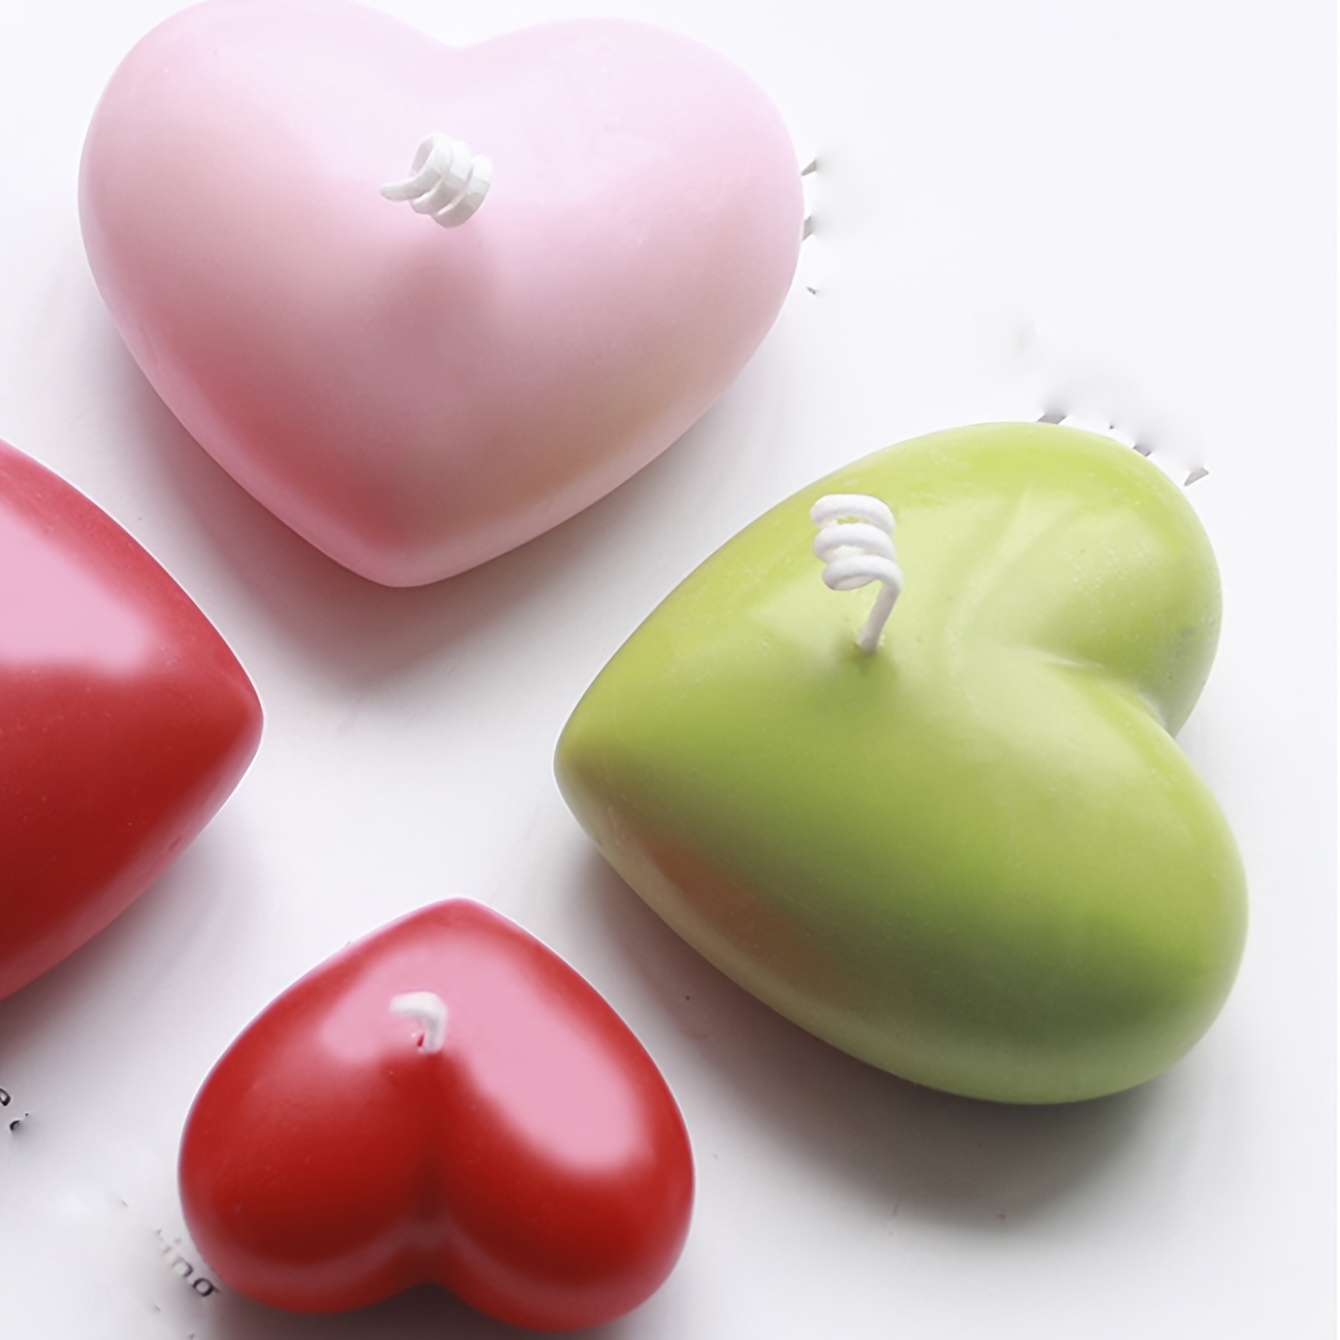 3D Heart Shaped Silicone Mold for Resin Large 6-Inch